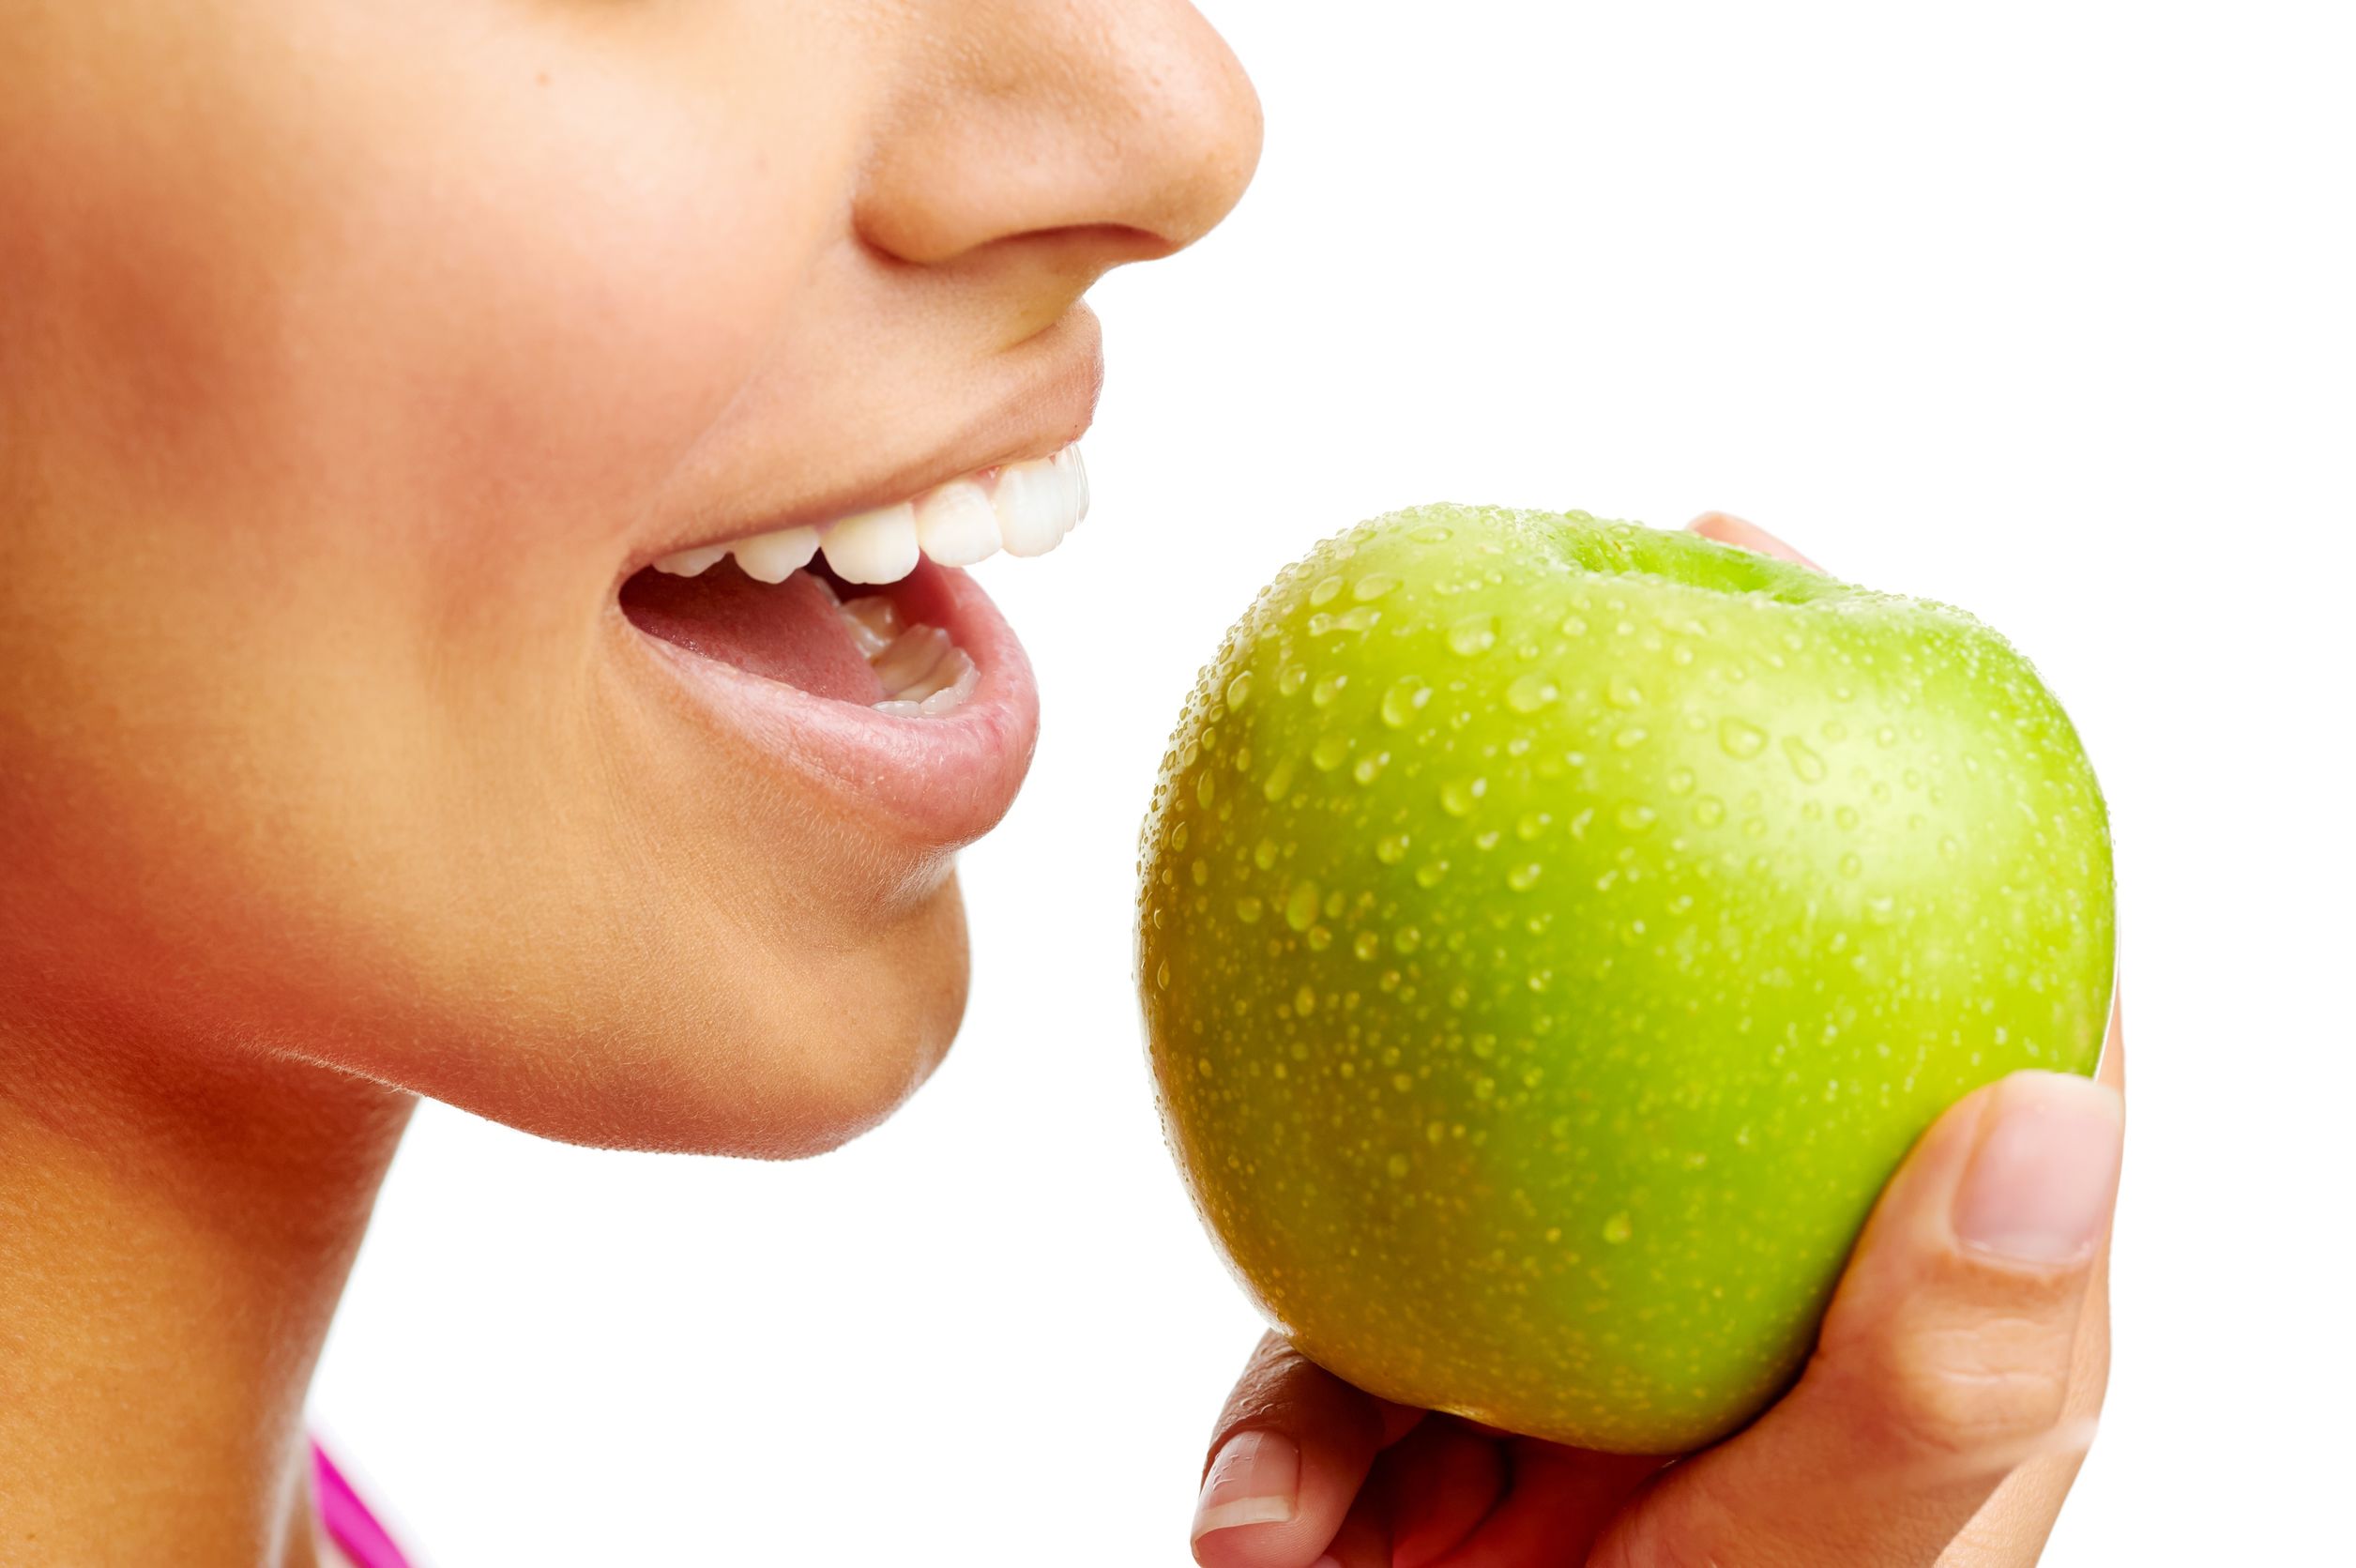 Featured image for “10 Foods That Are Beneficial For Your Teeth”